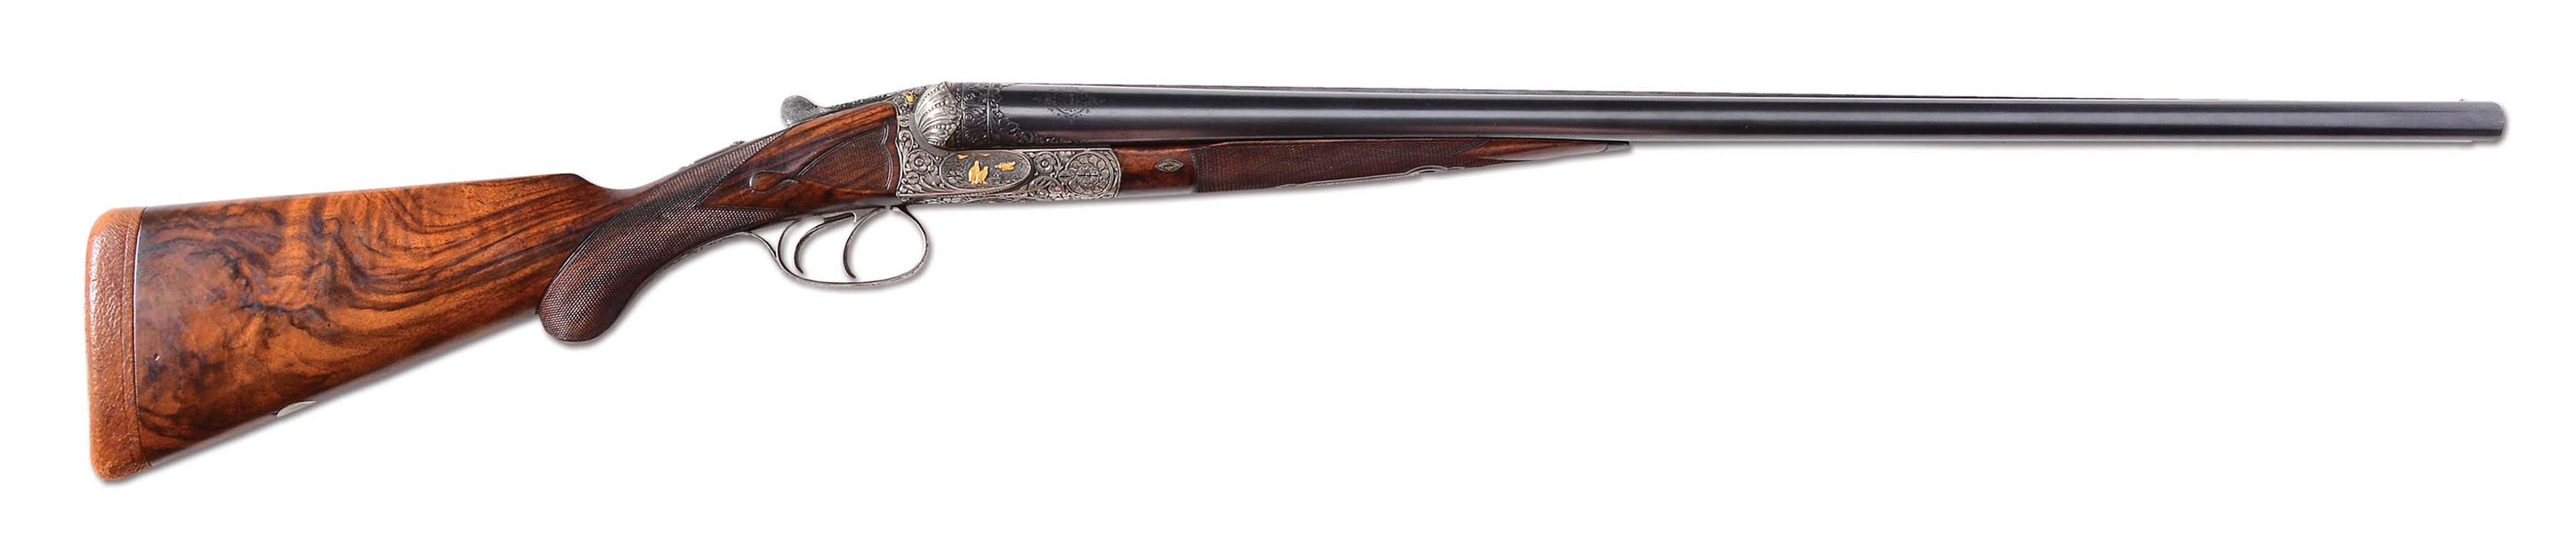 (A) CHARLES DALY DIAMOND QUALITY 12 GAUGE SXS SHOTGUN WITH TRULY EXCEPTIONAL DEEP RELIEF ENGRAVING AND ALMOST THREE DIMENSIONAL GOLD INLAID DOGS AND BIRDS.